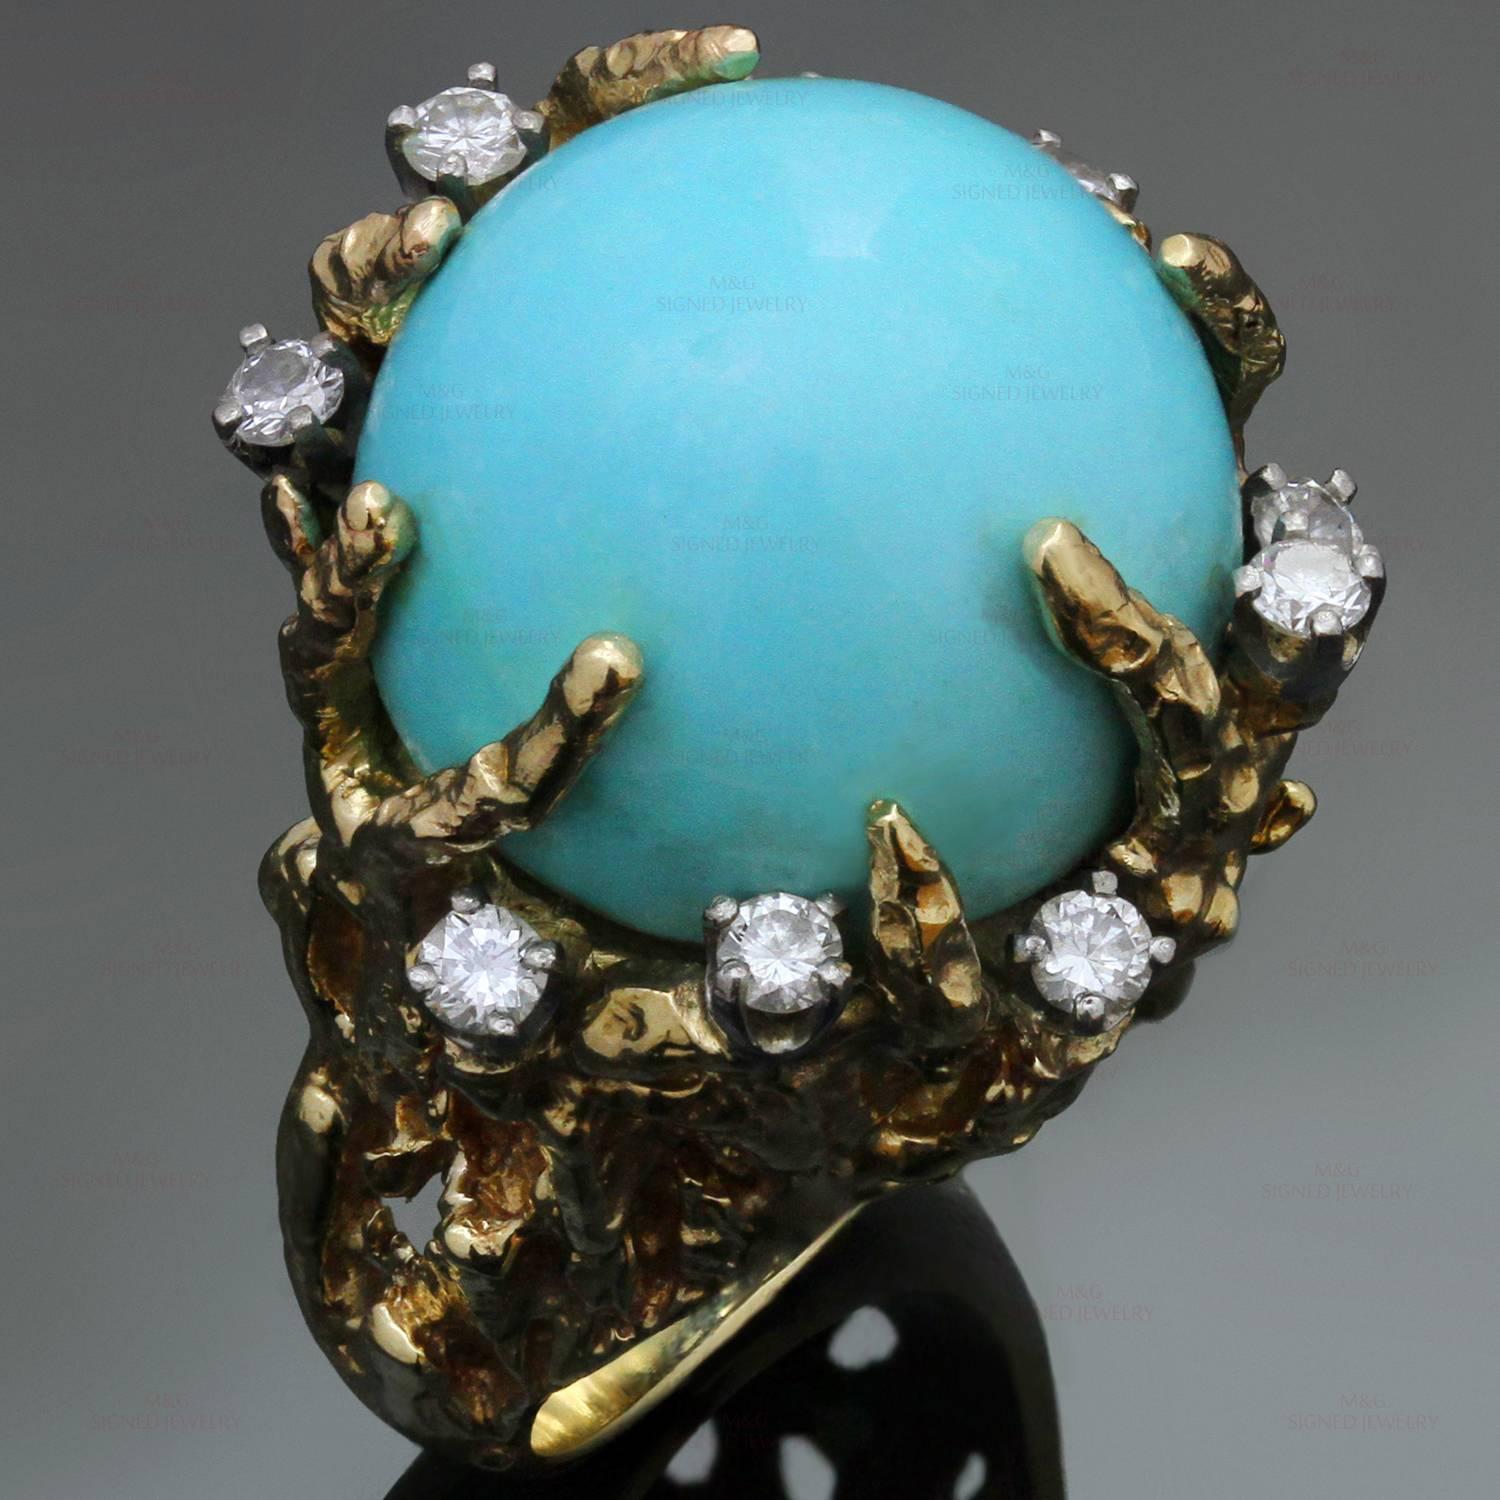 This stunning vintage cocktail ring is crafted in 14k nugget yellow gold and set with an oval cabochon turquoise measuring an estimated 16.6mm x 16.8mm, surrounded with brilliant-cut round diamonds of an estimated 0.50 carats. Made in United States